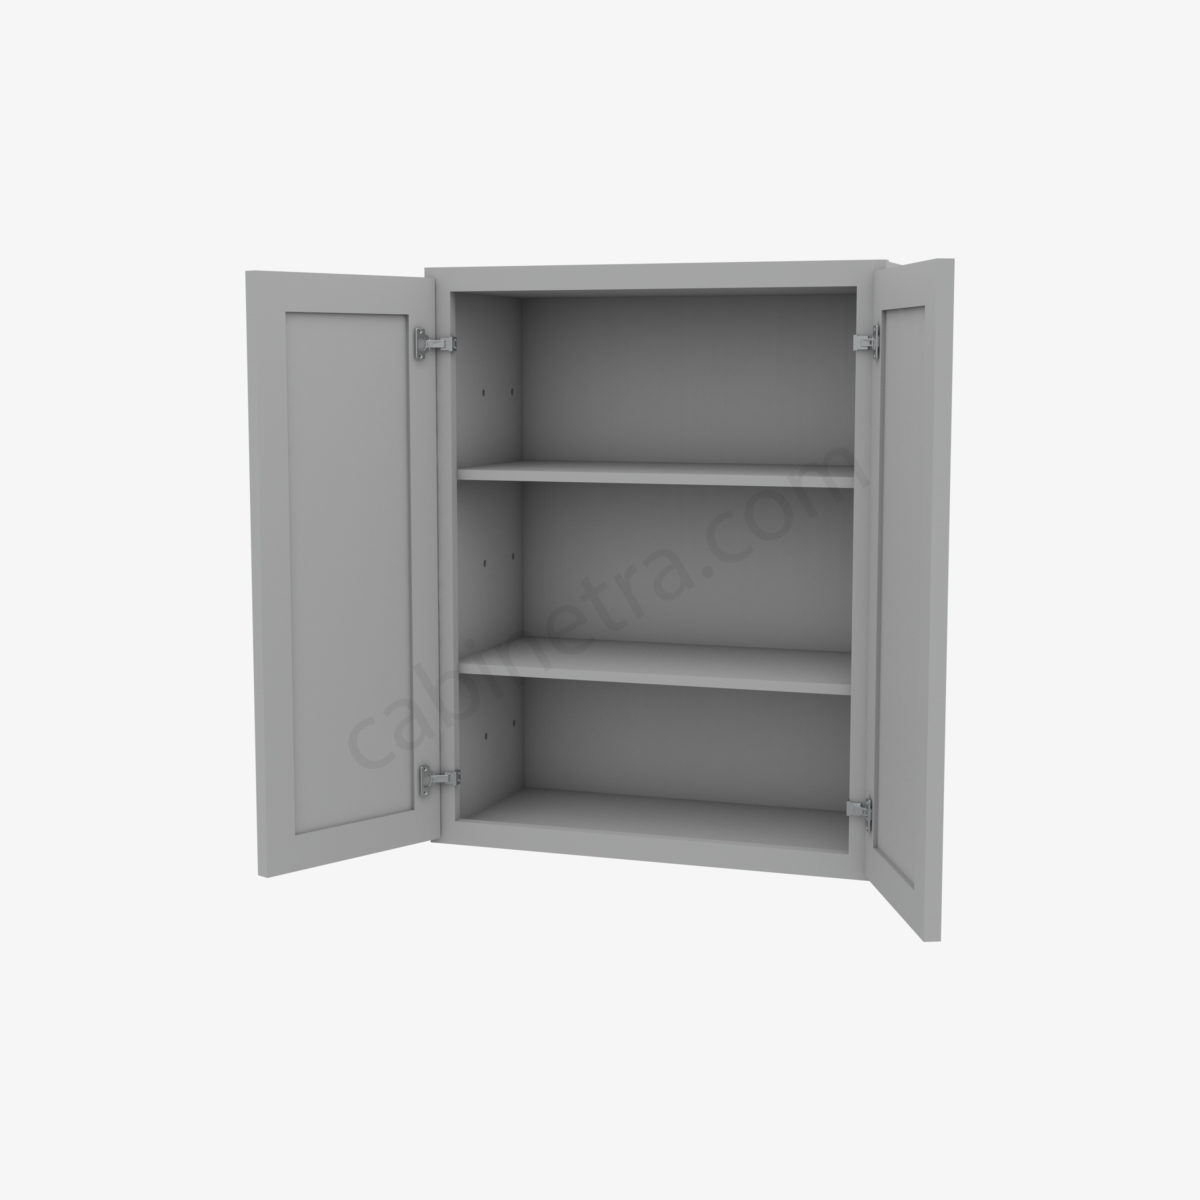 AB W2430B 5 Forevermark Lait Gray Shaker Cabinetra scaled